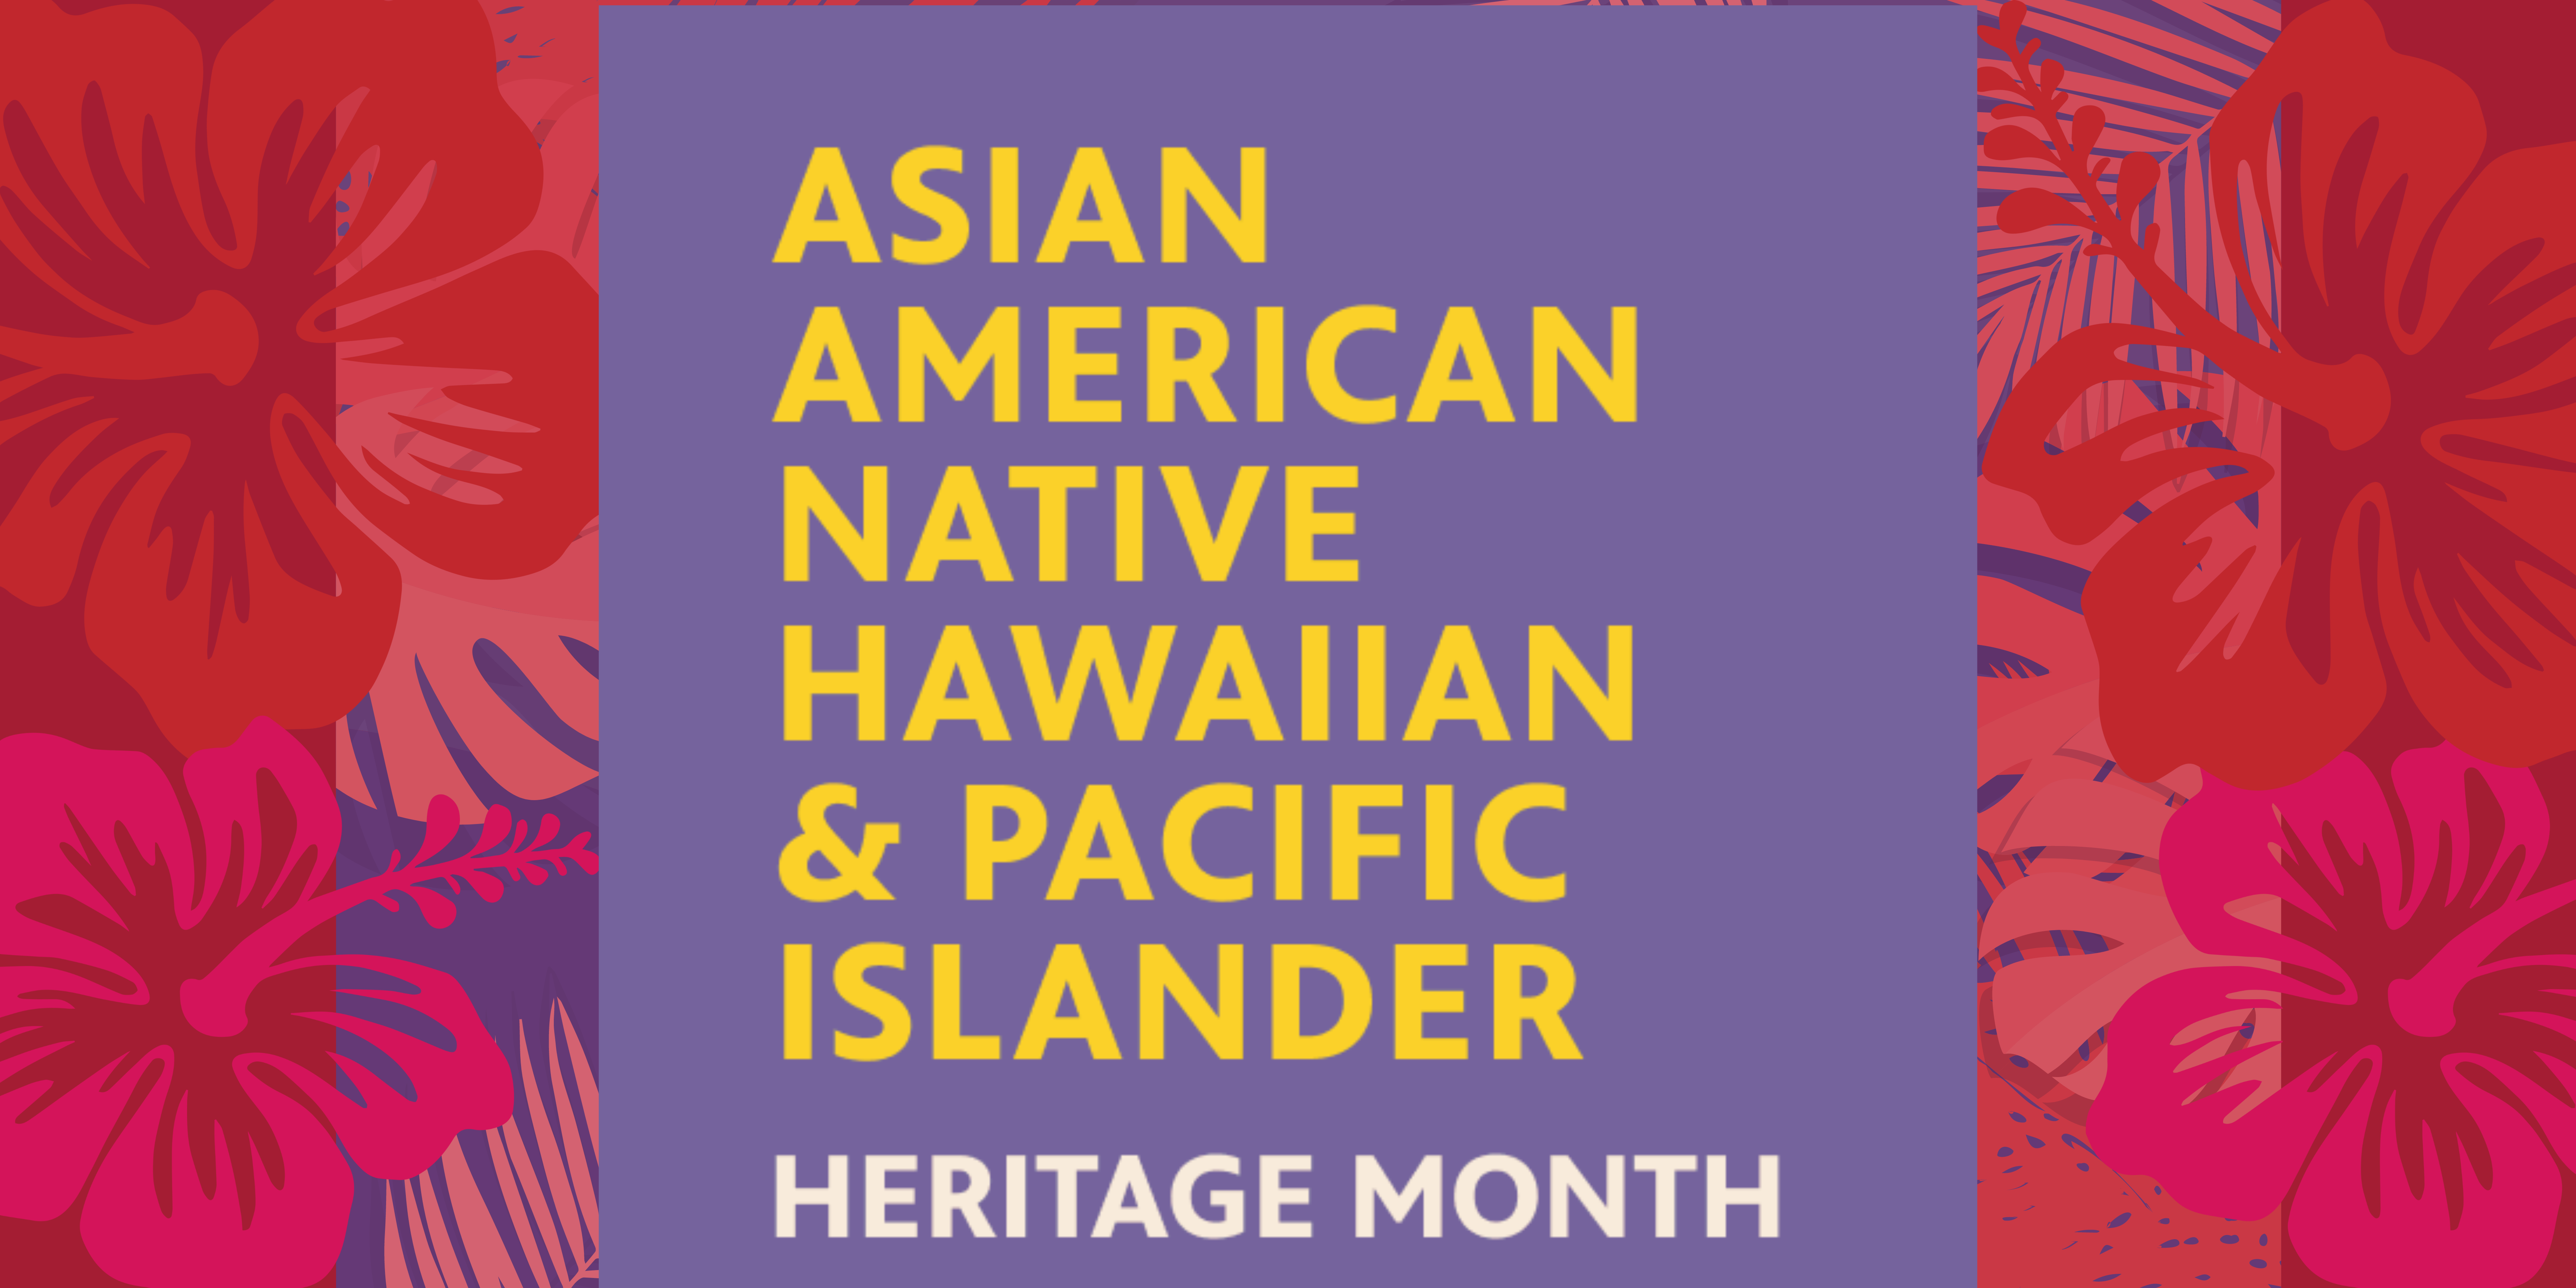 Right and left borders are red hibiscus flowers. Purple box with yellow text says, "Asian American, Native Hawaiian & Pacific Islander Heritage Month."